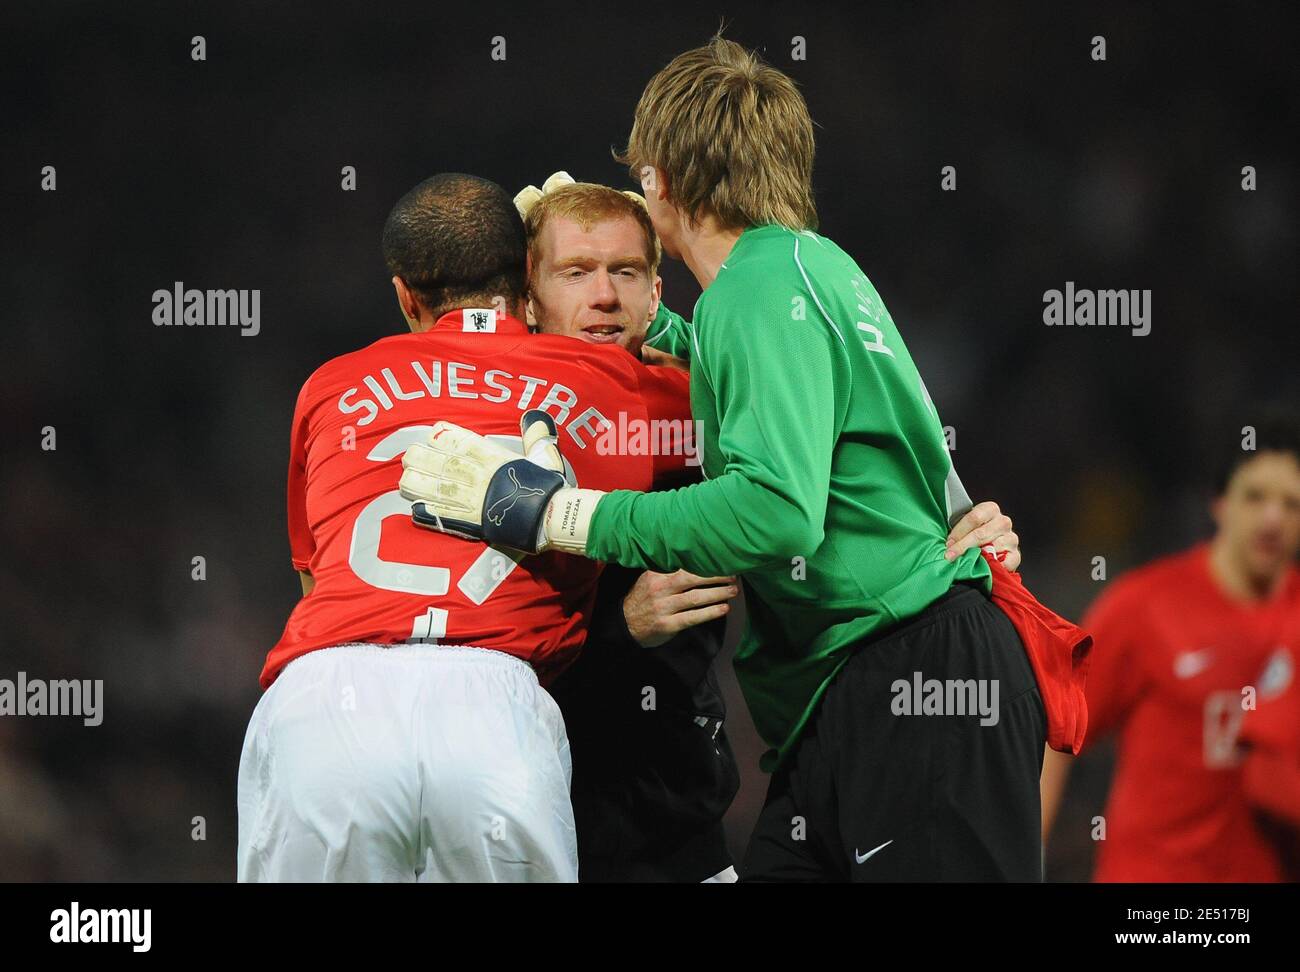 Manchester United's Mikael Silvestre celebrates with Paul Scholes and Tomasz Kuszcak at the end of the UEFA Champions League Semi-Final second leg soccer match between Manchester United and FC Barcelona at Old Trafford in Manchester, England on April 29 2008. Manchester won 1-0. Photo by Steeve McMay/Cameleon/ABACAPRESS.COM Stock Photo